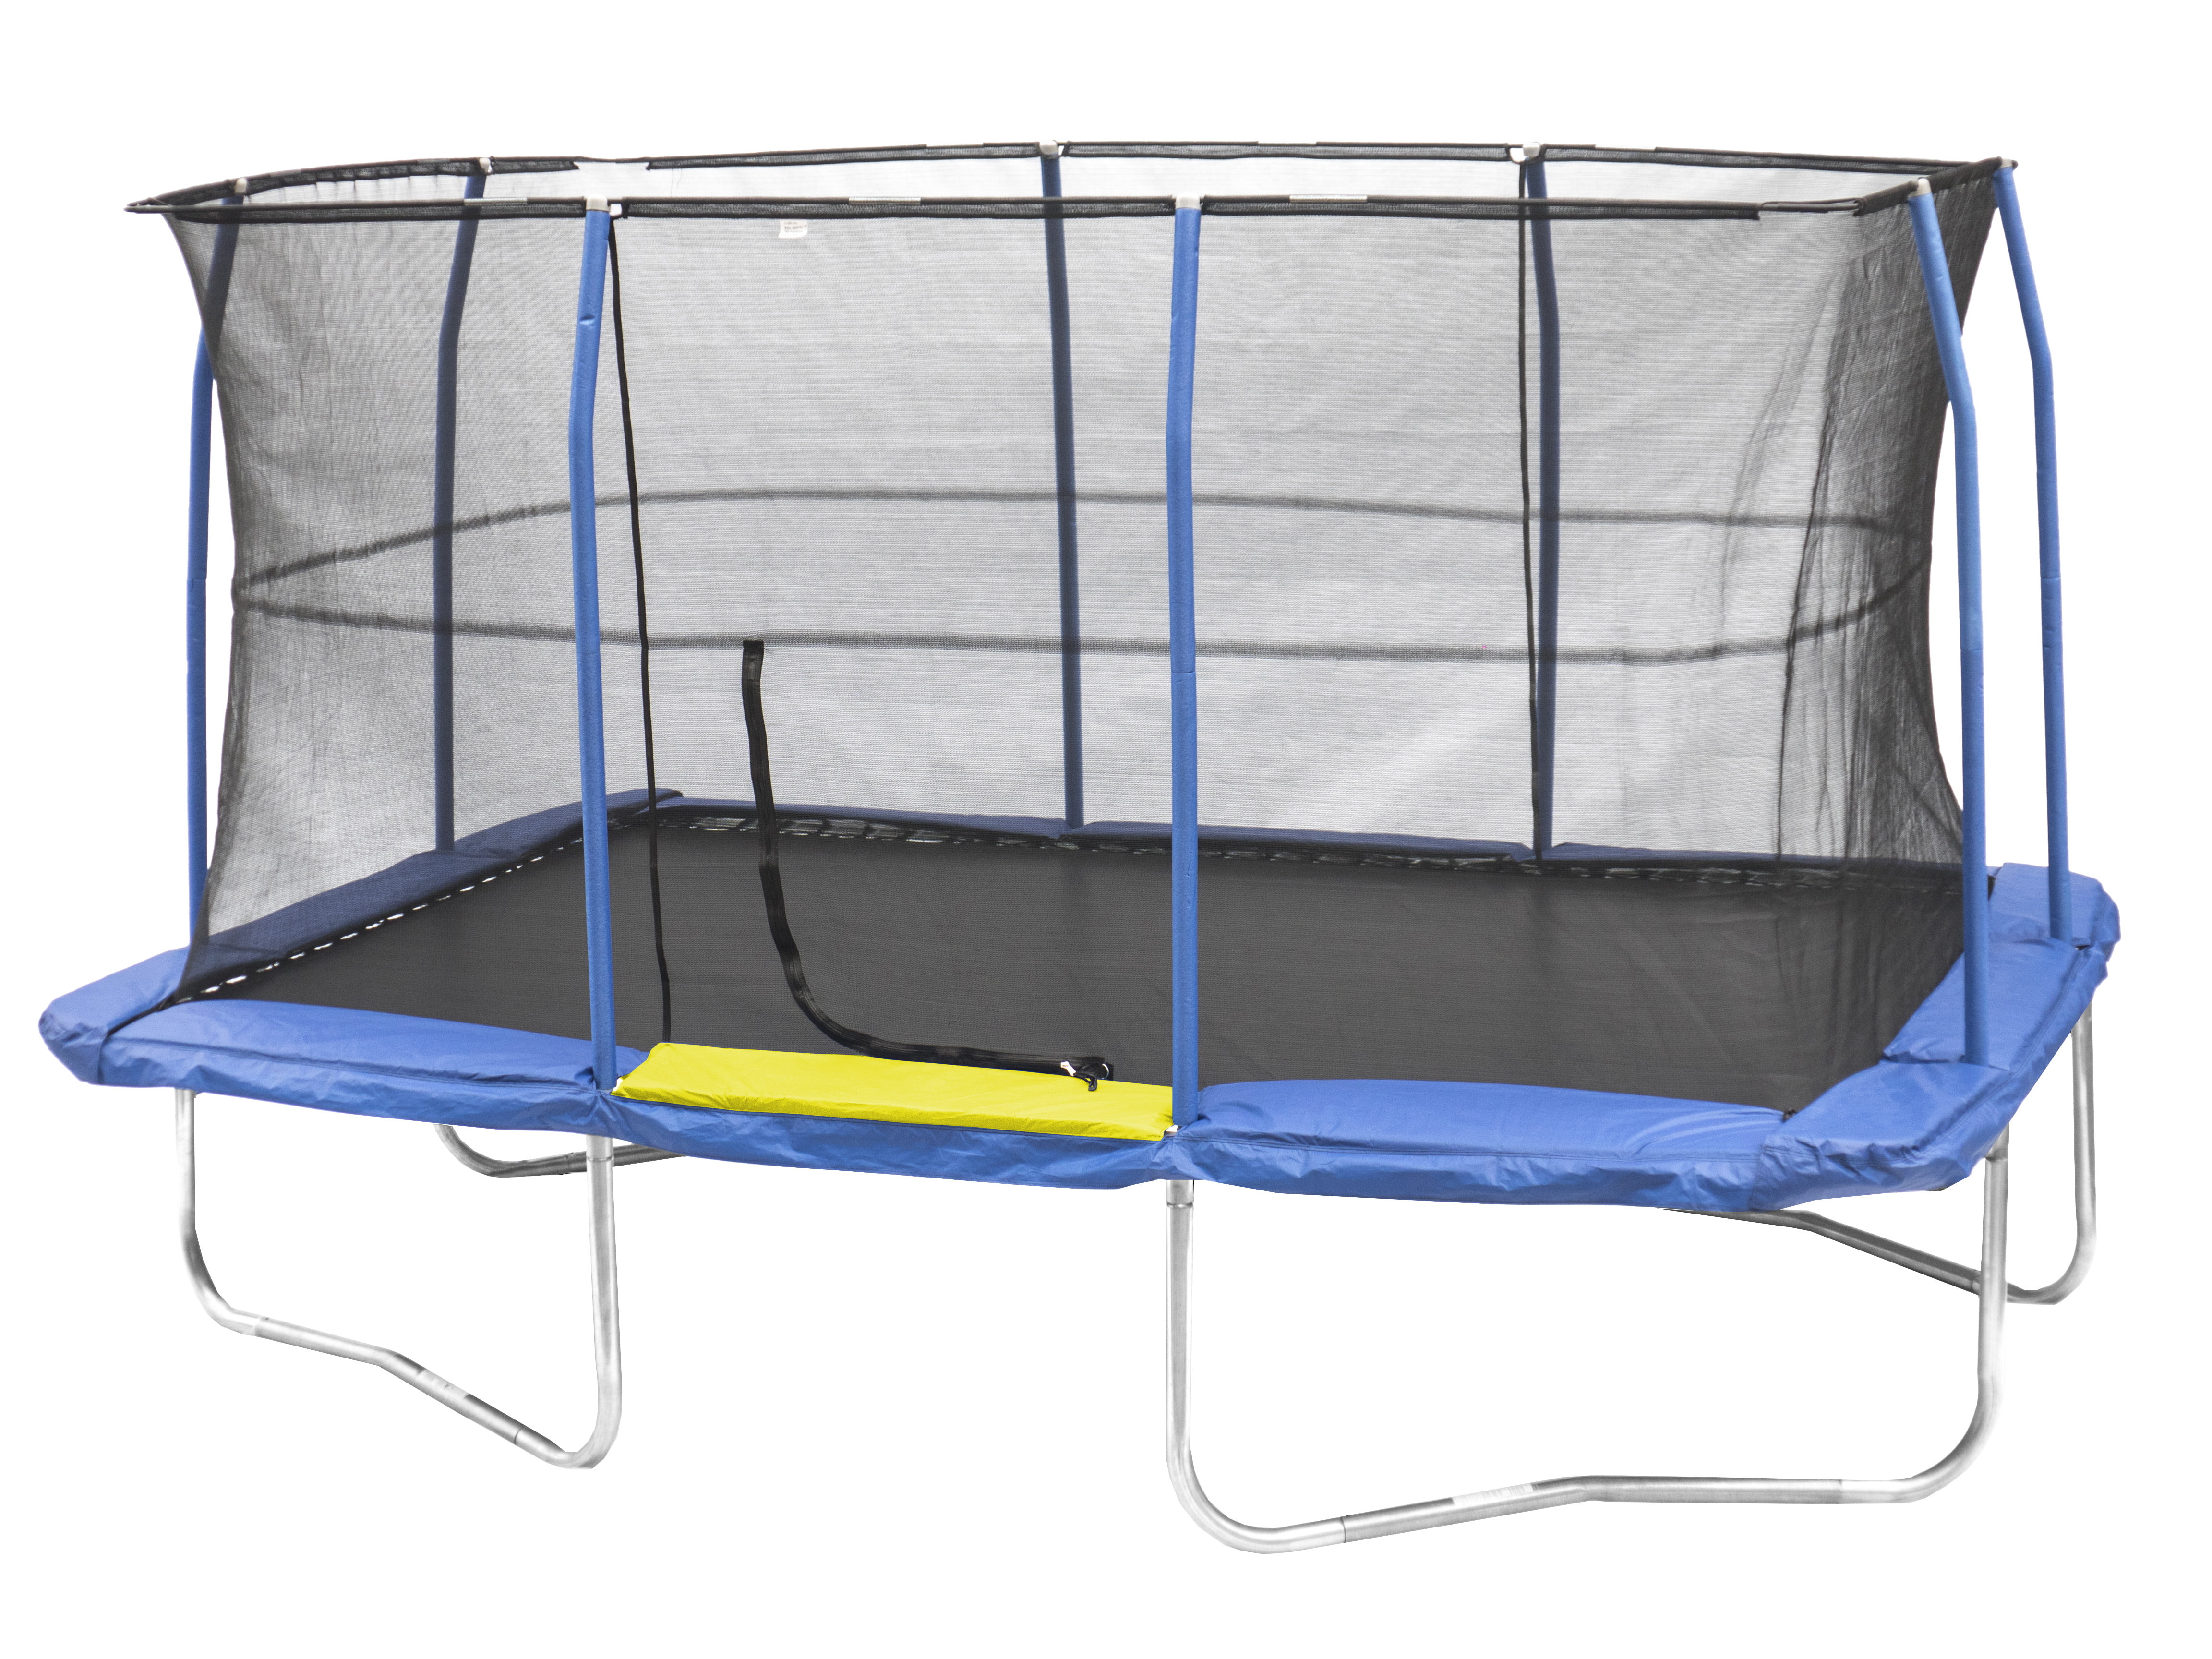 Jumpking Rectangle 10 x 14' Trampoline, with Enclosure, Blue/Yellow